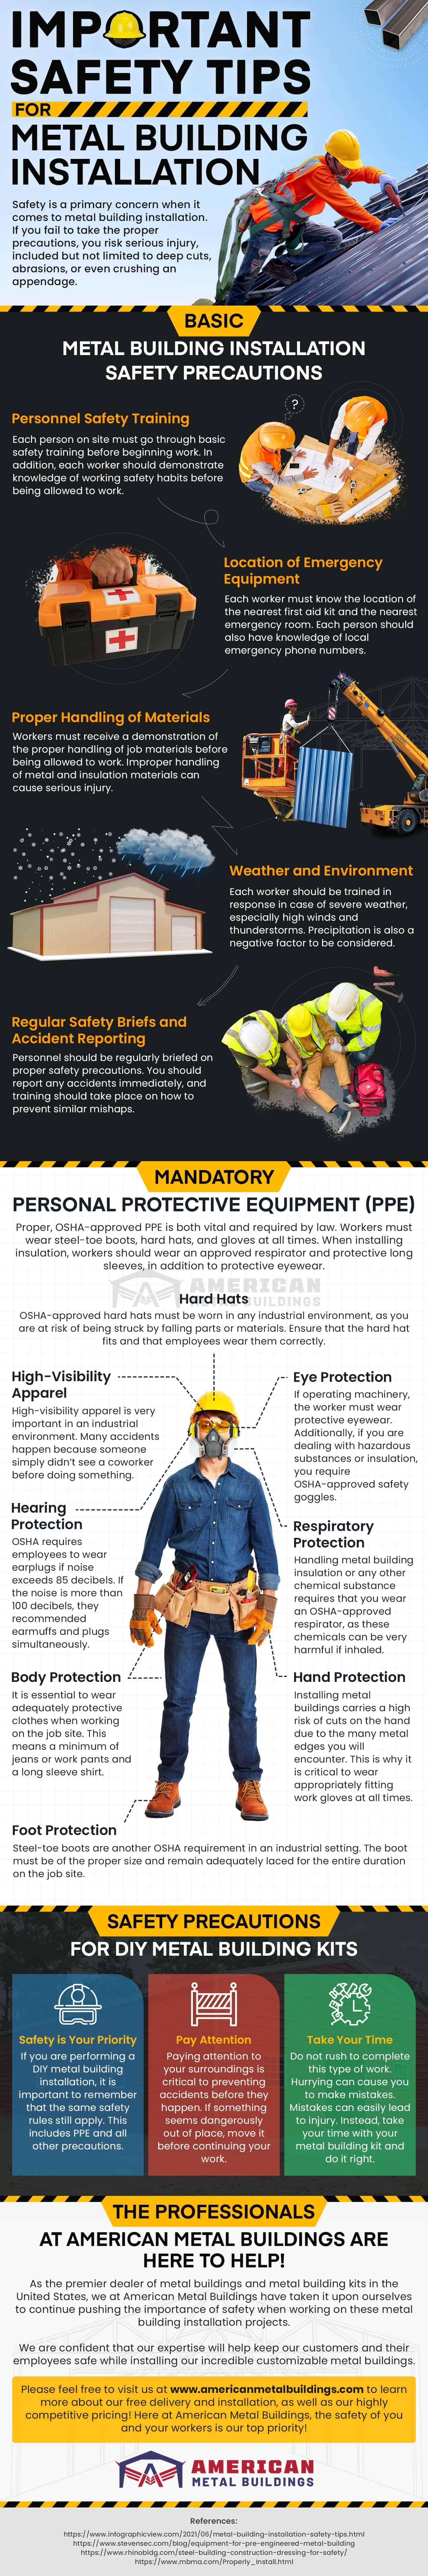 Important-Safety-Tips-for-Metal-Building-Installation